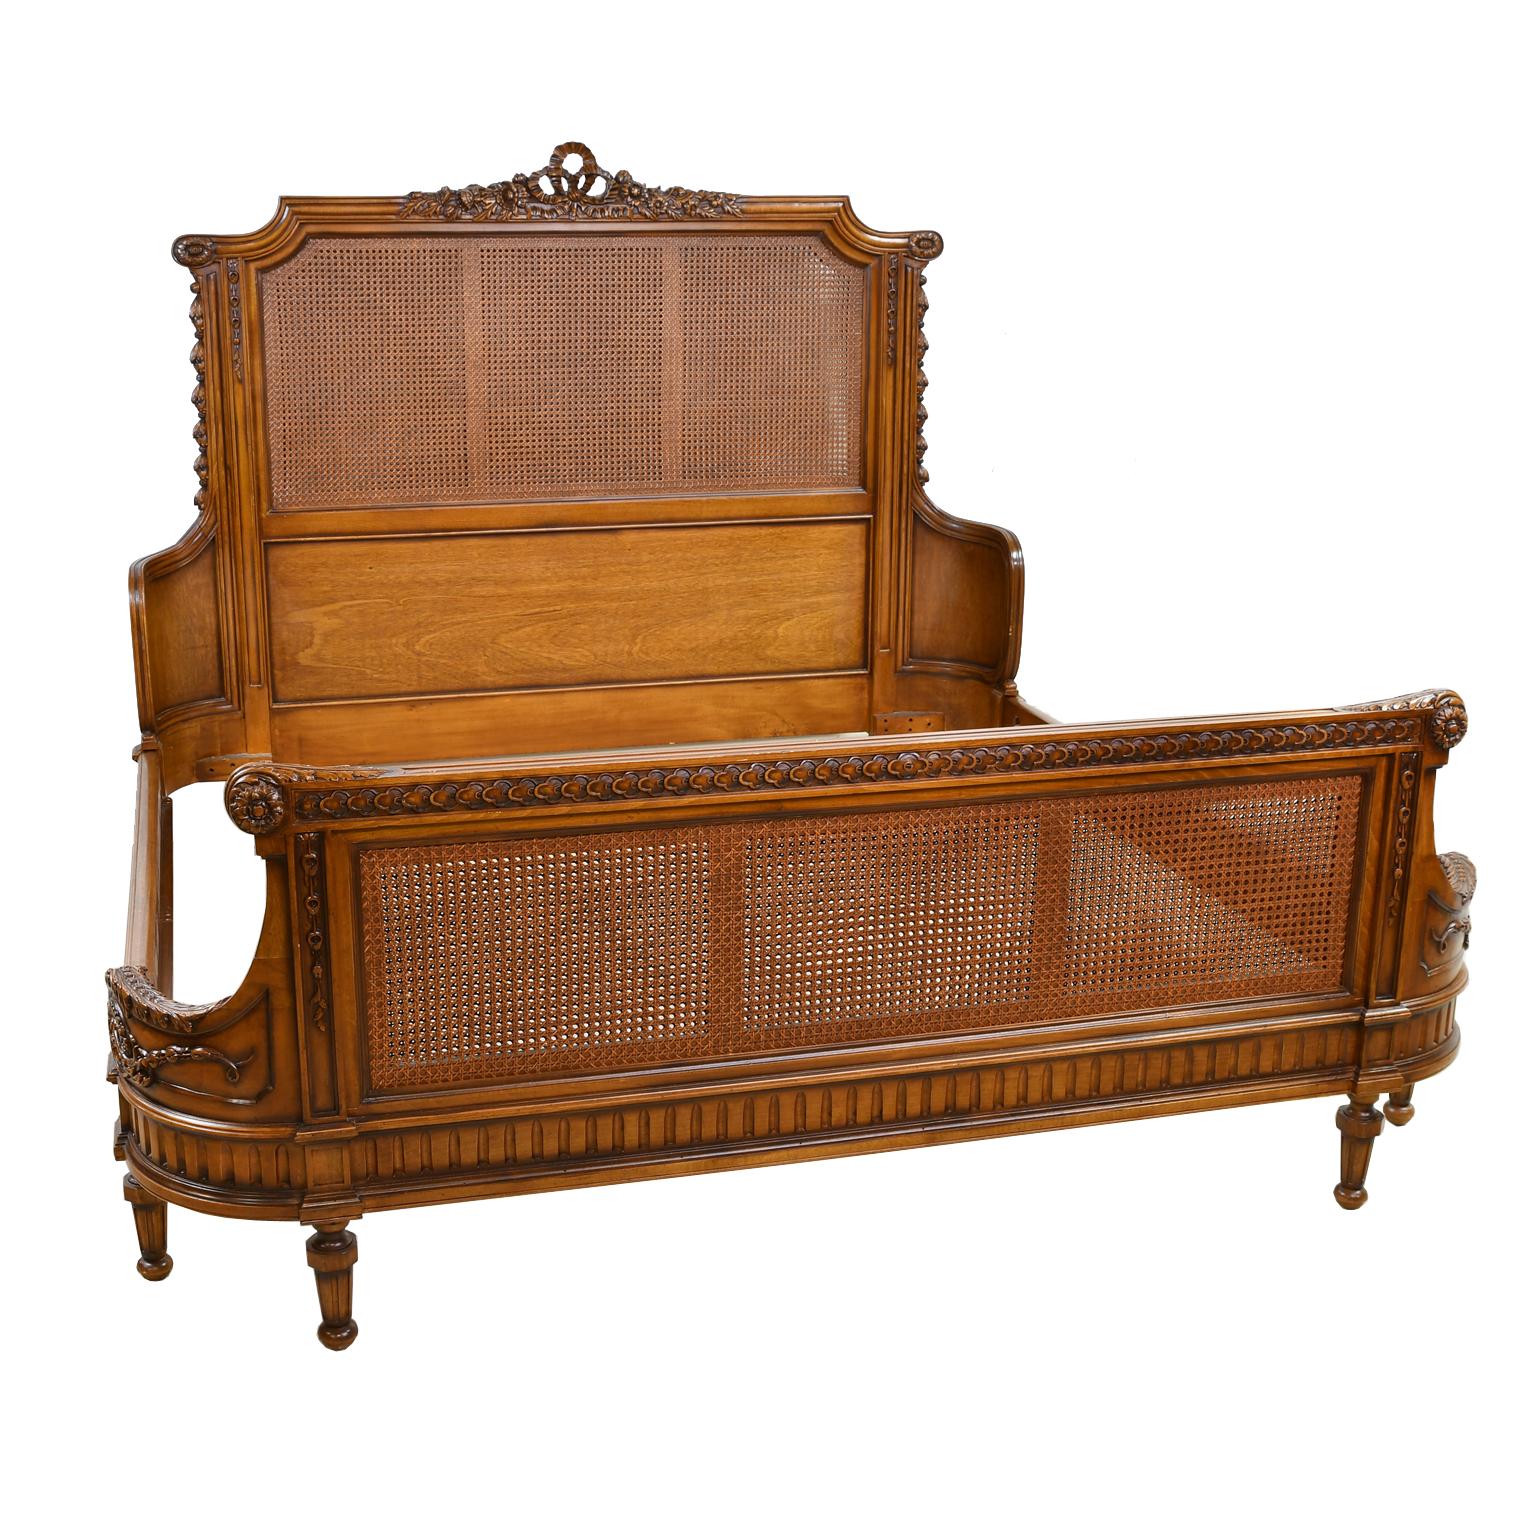 A lovely and beautifully-crafted reproduction Louis XVI style bed frame in king size in a medium-colored hardwood that looks like walnut, with caning on the frame's headboard and footboard which are rounded at the corners. Carved embellishments